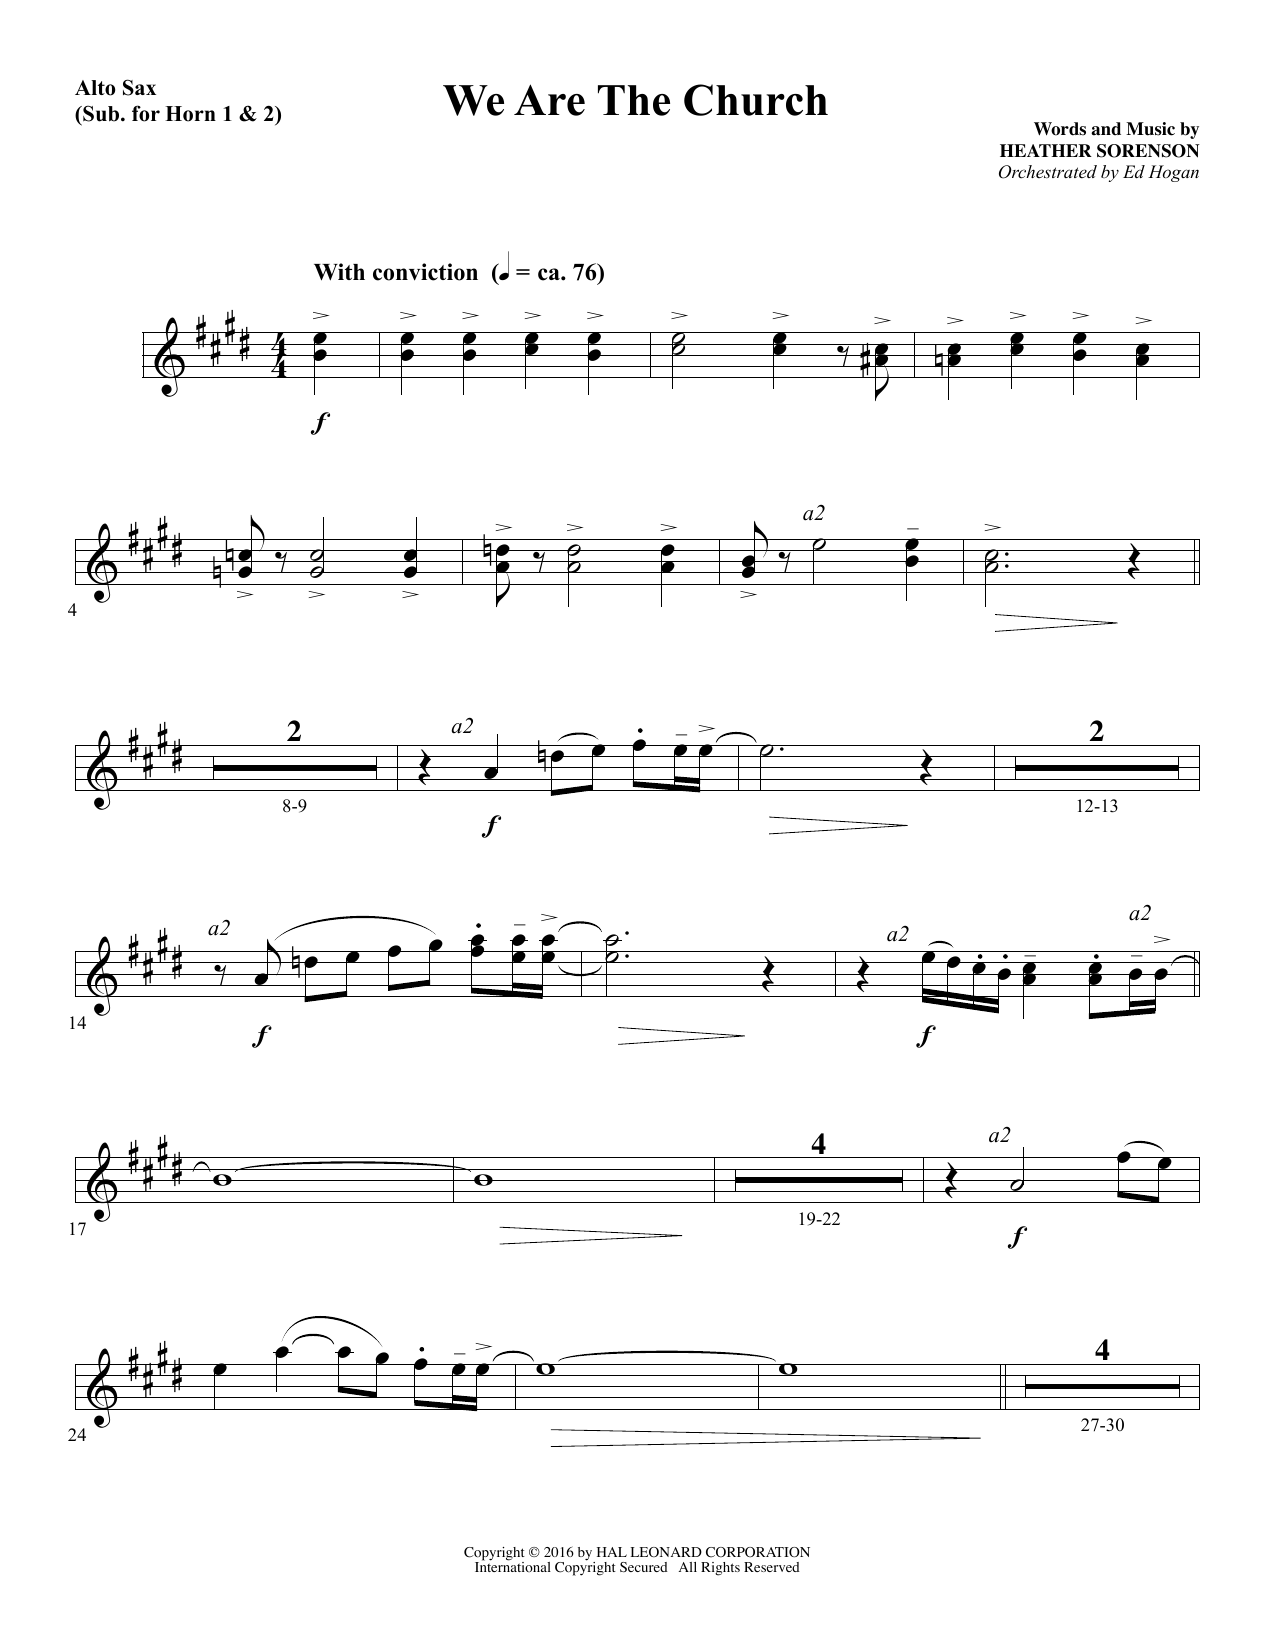 Download Heather Sorenson We Are the Church - Alto Sax 1-2 (sub. Horn 1-2) sheet music and printable PDF score & Sacred music notes